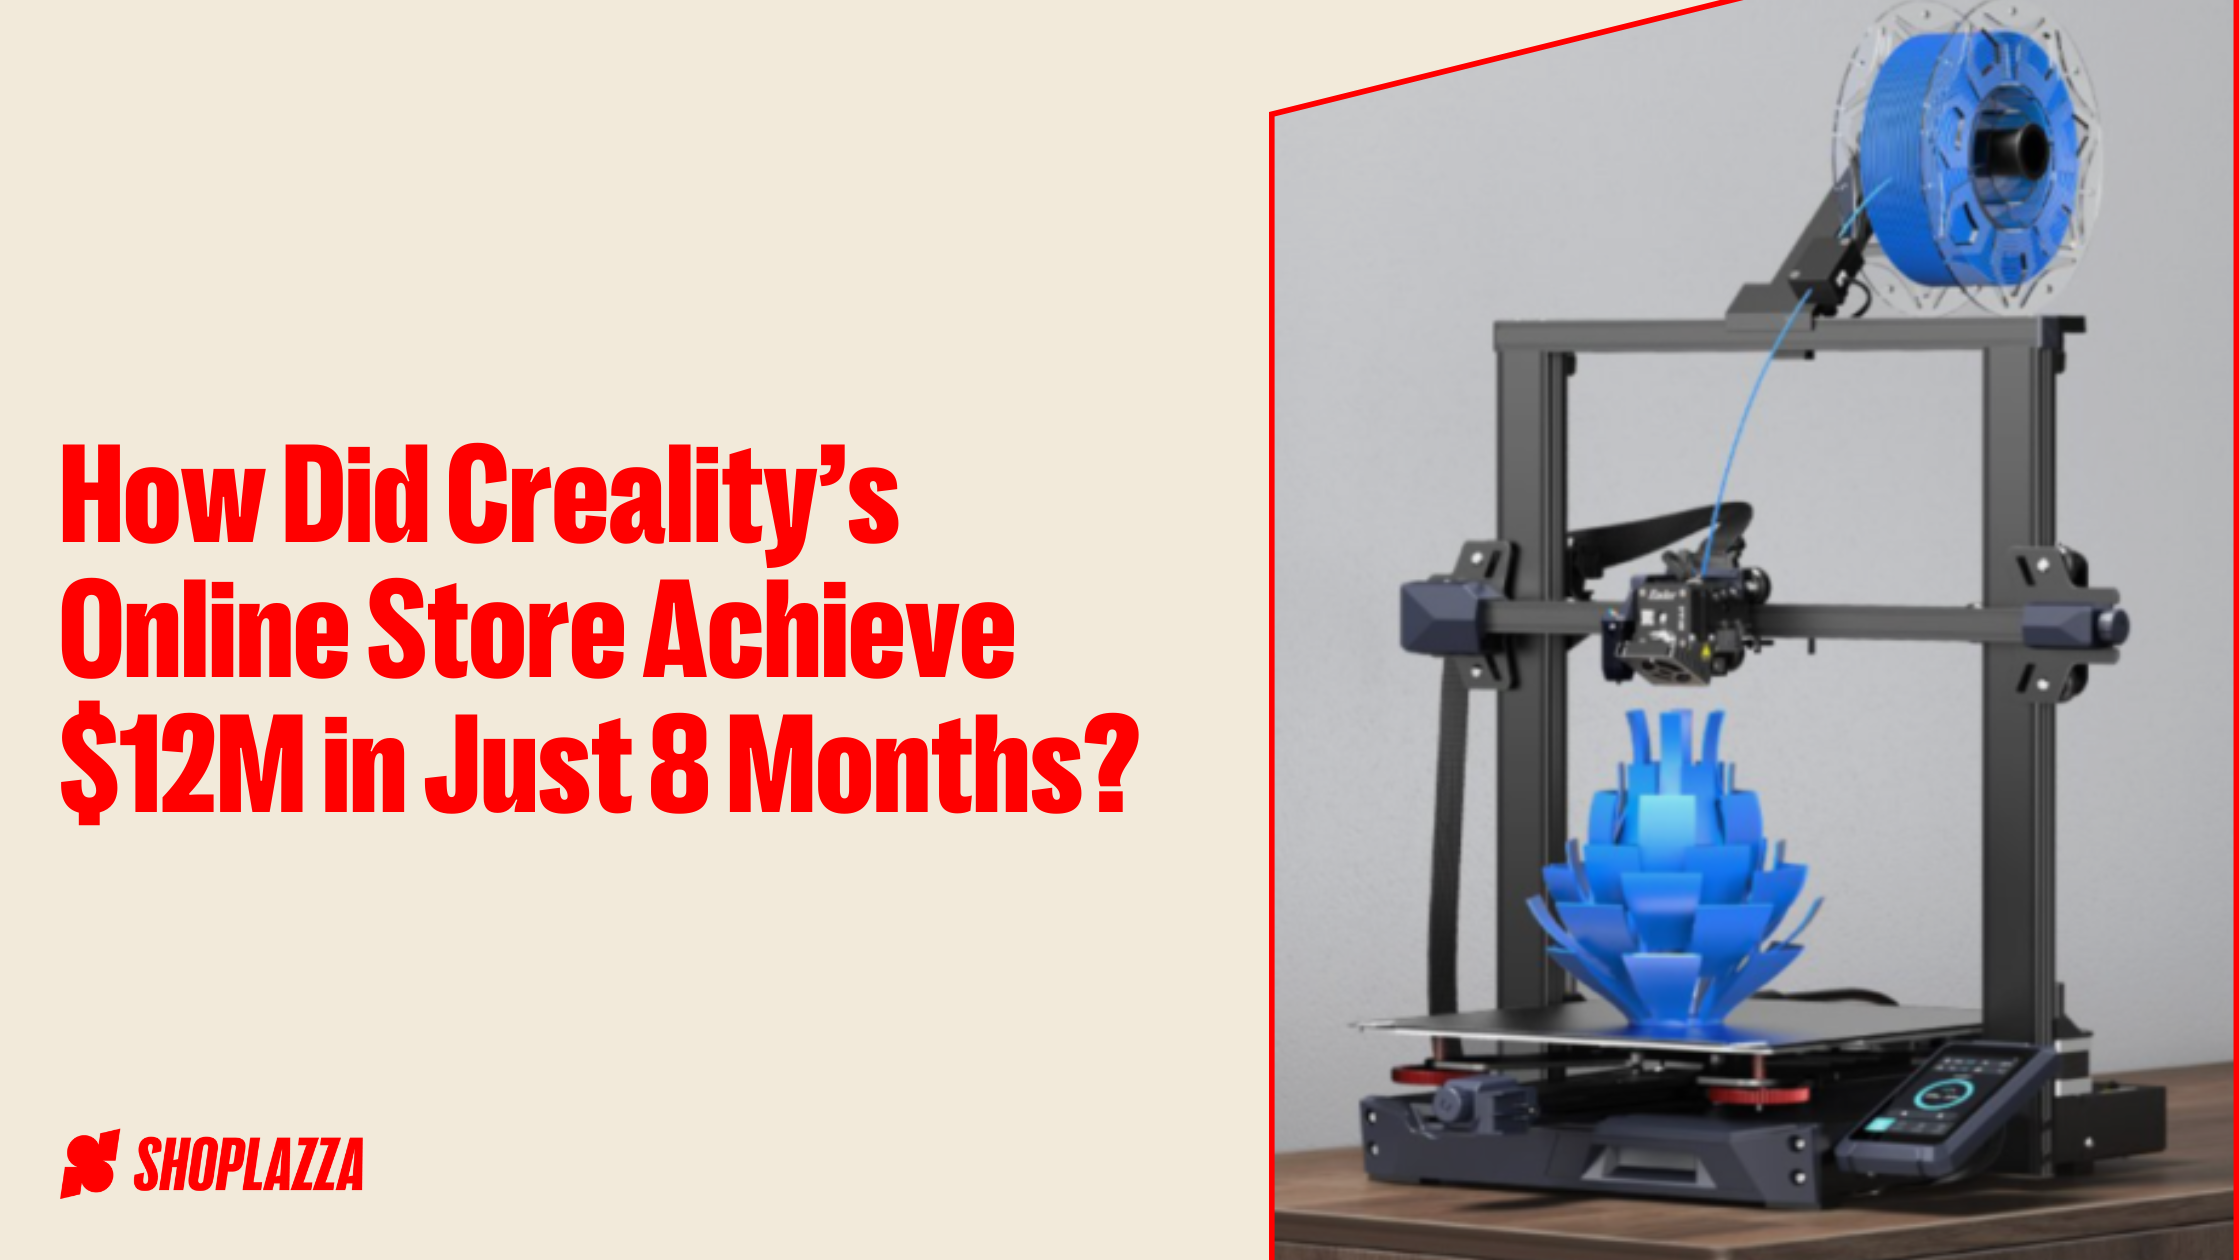 Cover image for blog post. On the left, it says, How did Creality’s online store achieve $12M in just 8 months? On the right, there is a picture of a Creality 3D printer in use.